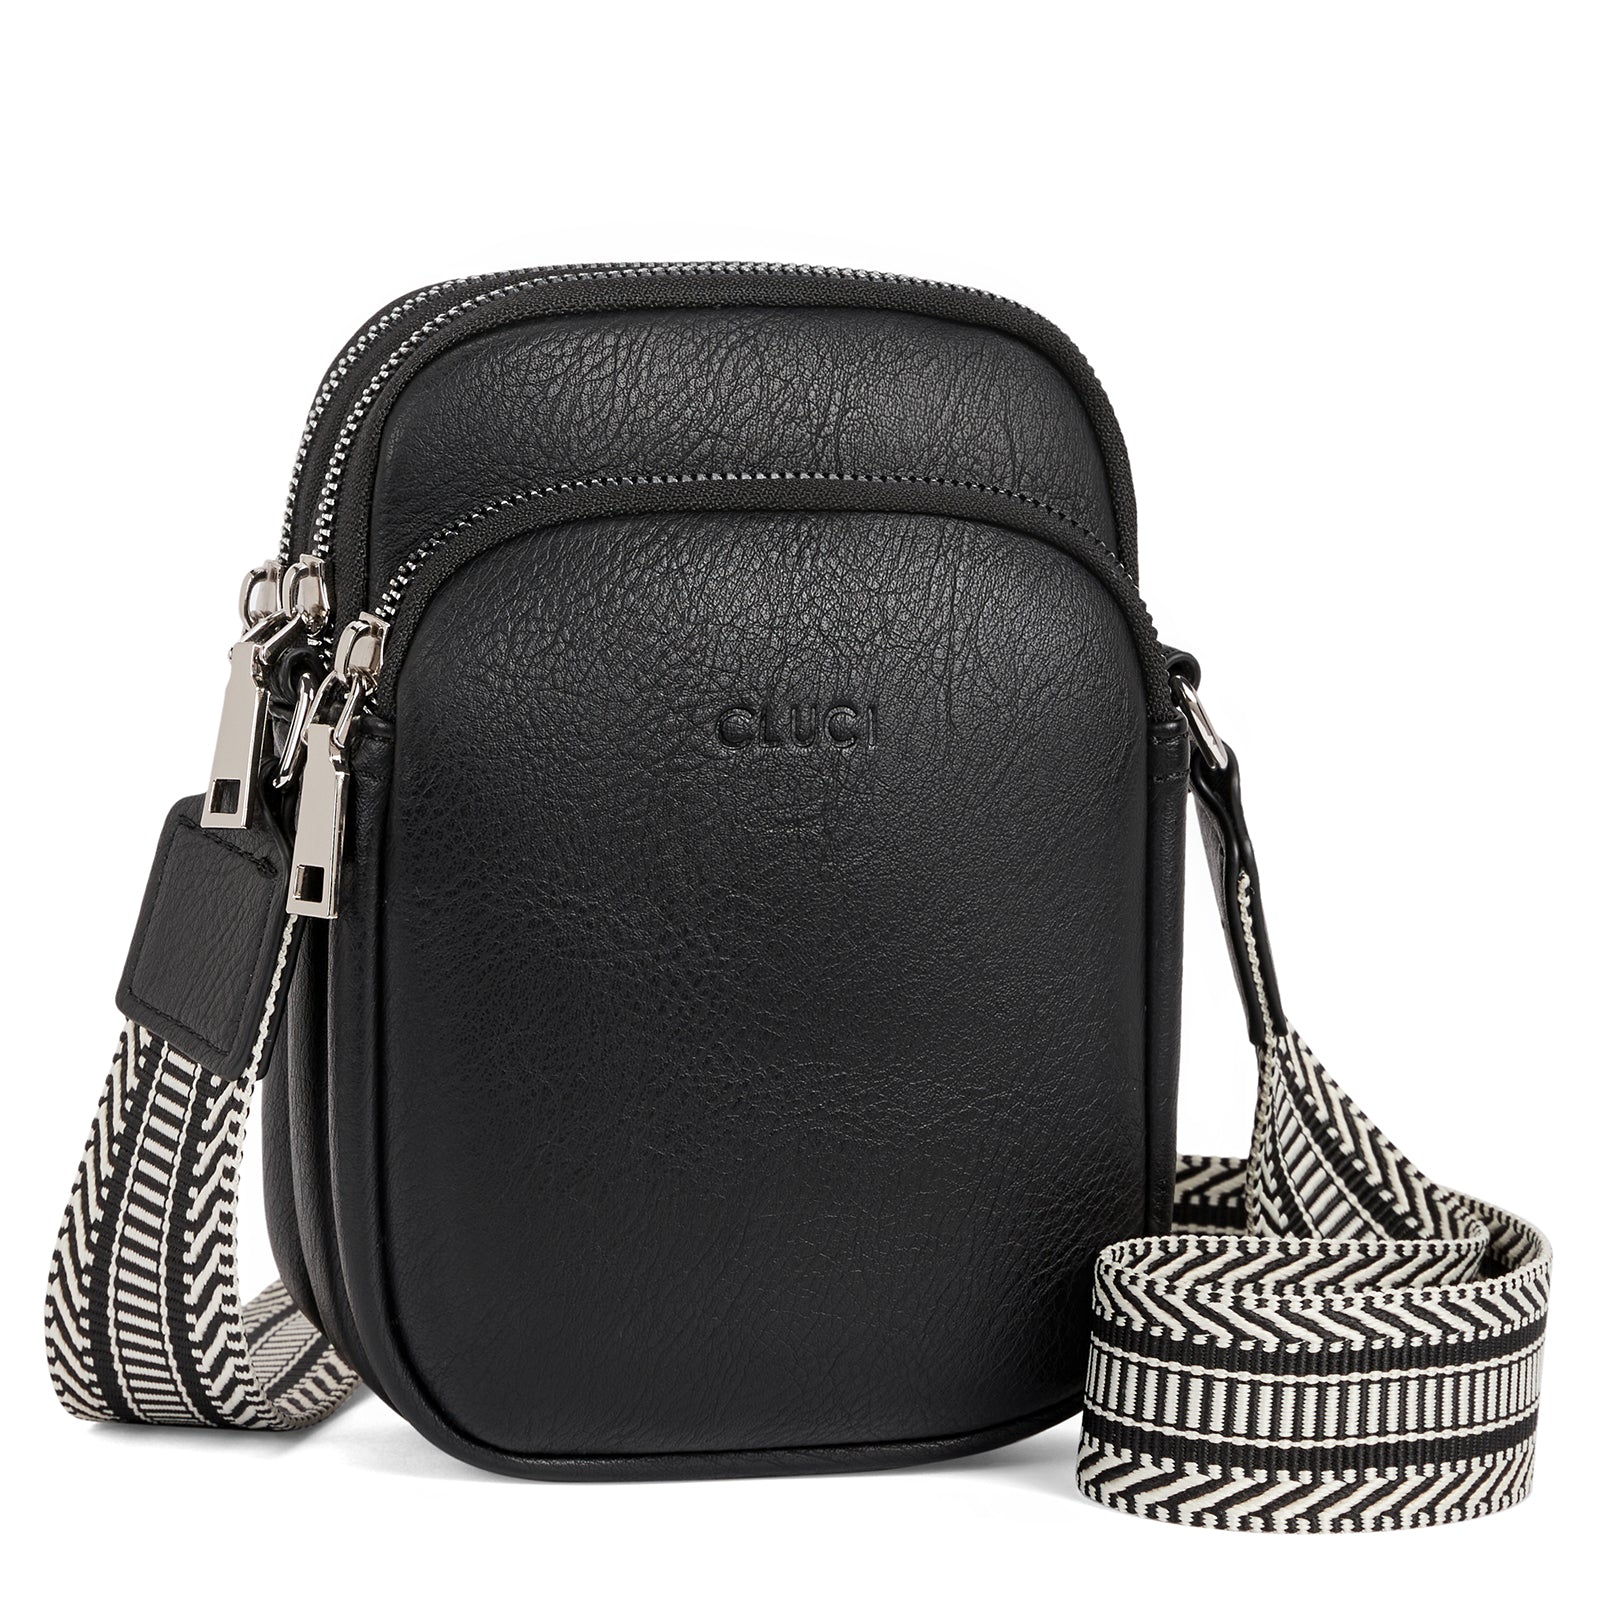 BLACK HAND BAG WITH GOLD CHAIN STRAPS AND BUCKLE.(KELOLA D) BRAND | Fashion  bags, Chain strap, Black cross body bag